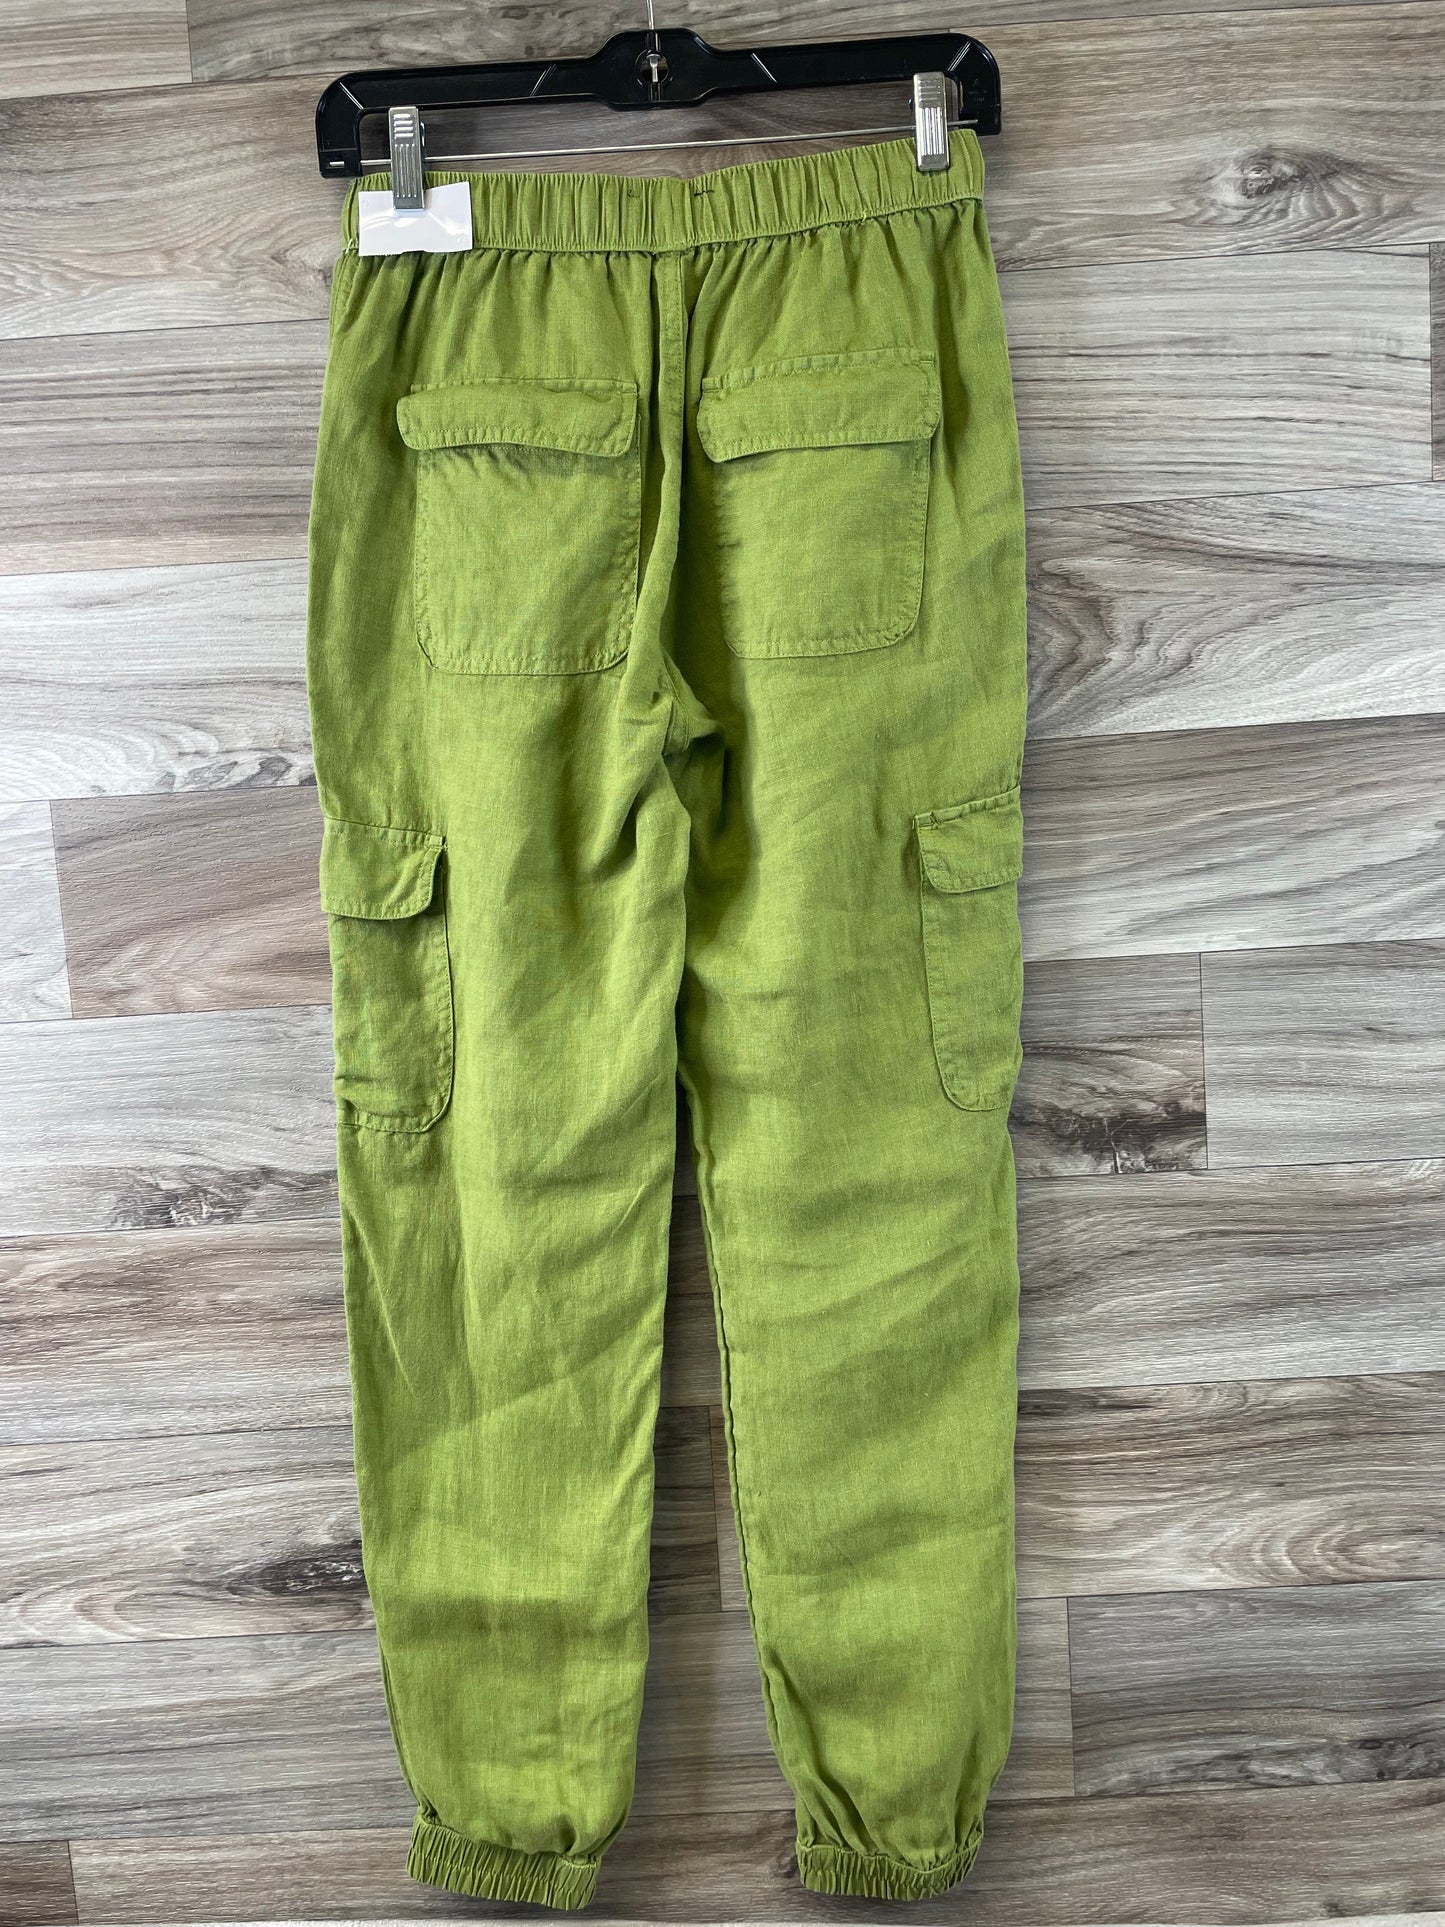 Green Pants Joggers Nicole Miller, Size Xs